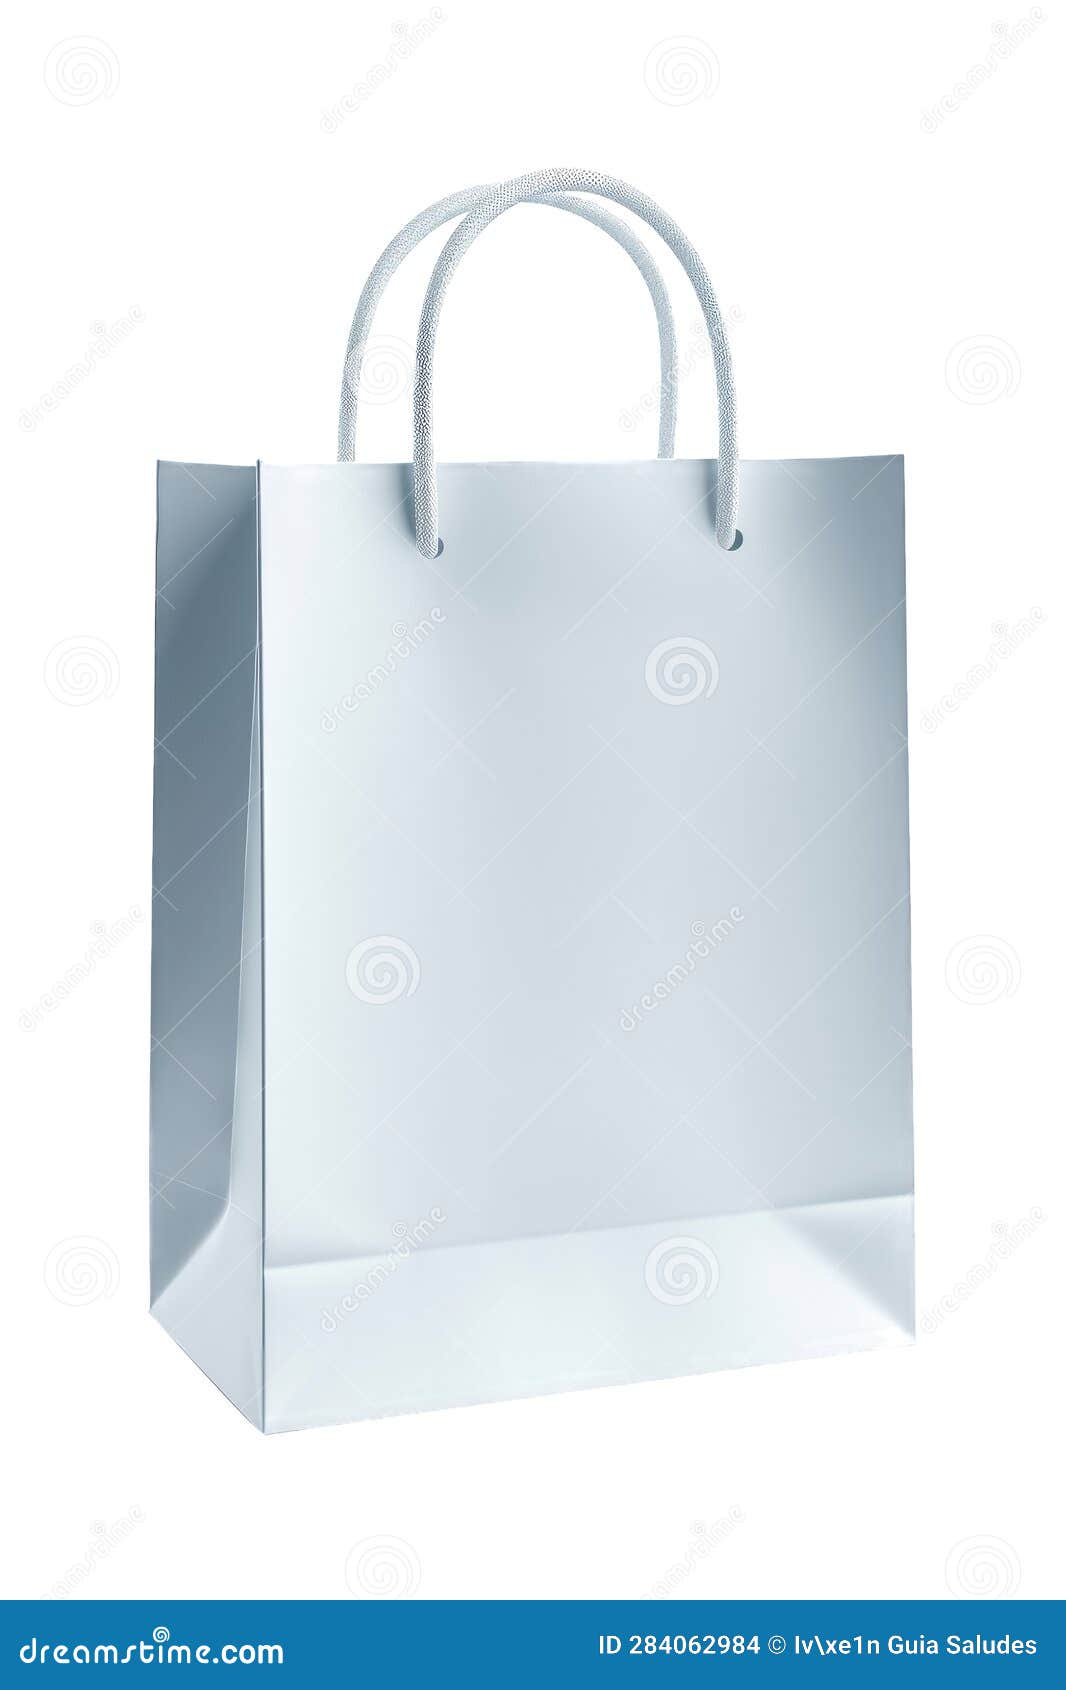 Paper Shopping bag, Colored shopping bags transparent background PNG clipart